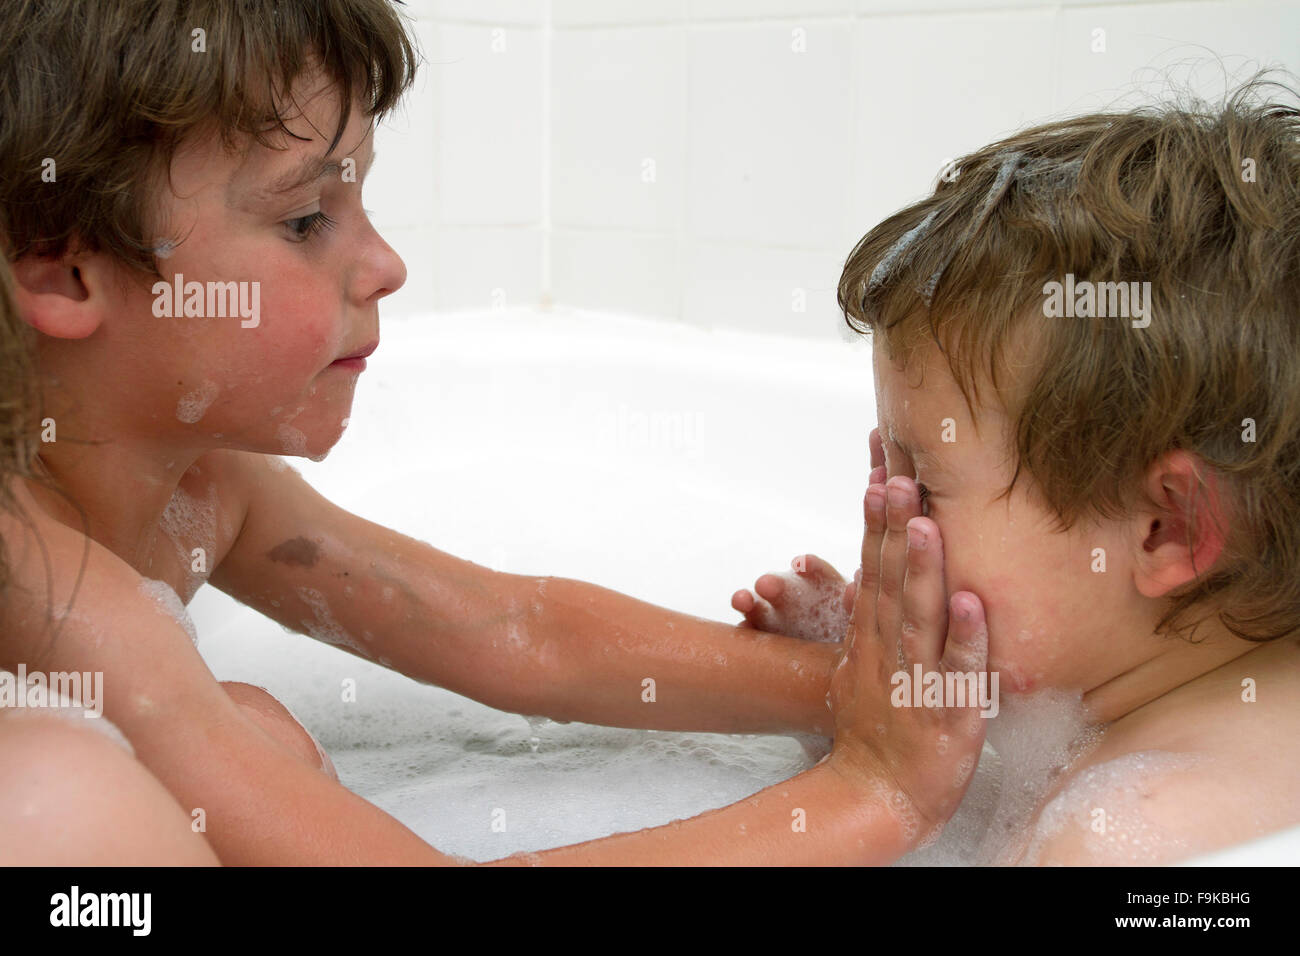 Two toddler boys having fun with bubbles in the bath. Older brother washing his younger sibling's face. Stock Photo